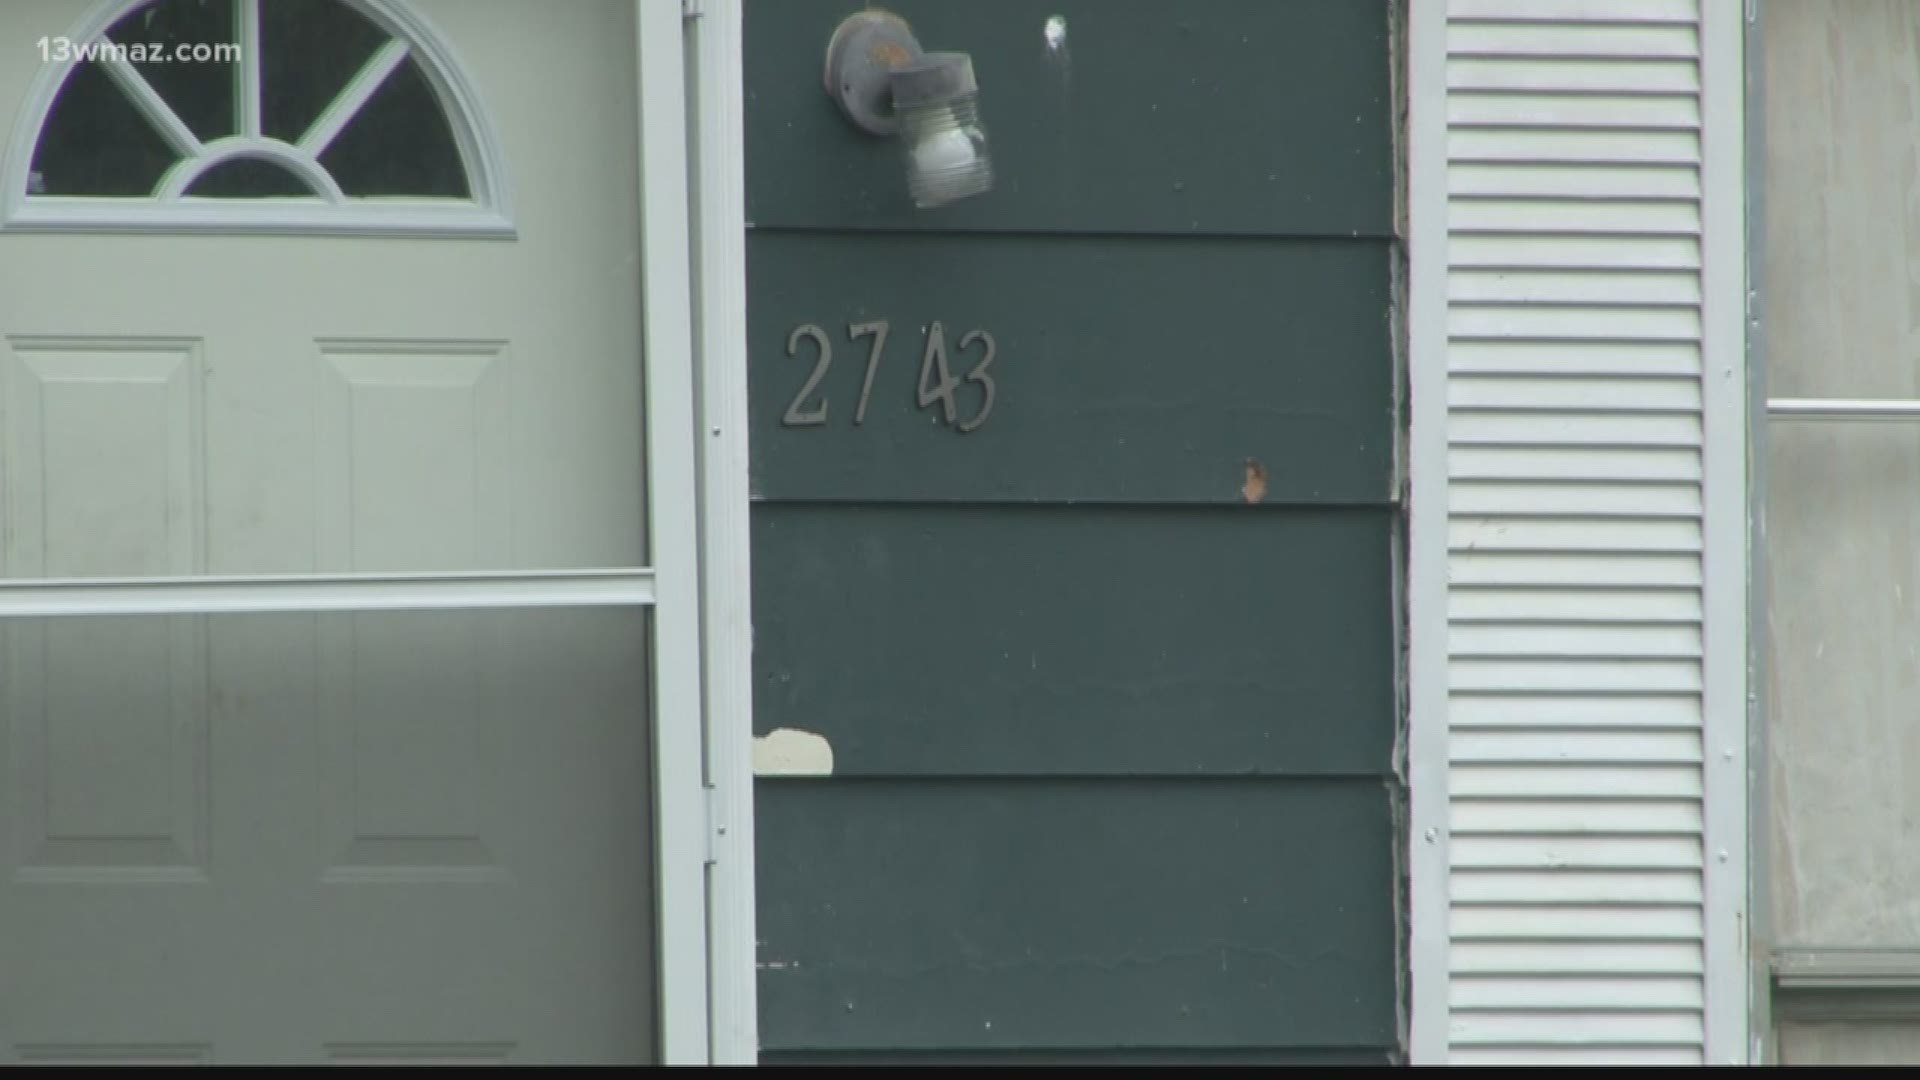 The Macon-Bibb Fire Department offers to paint house numbers on the curb of homes.